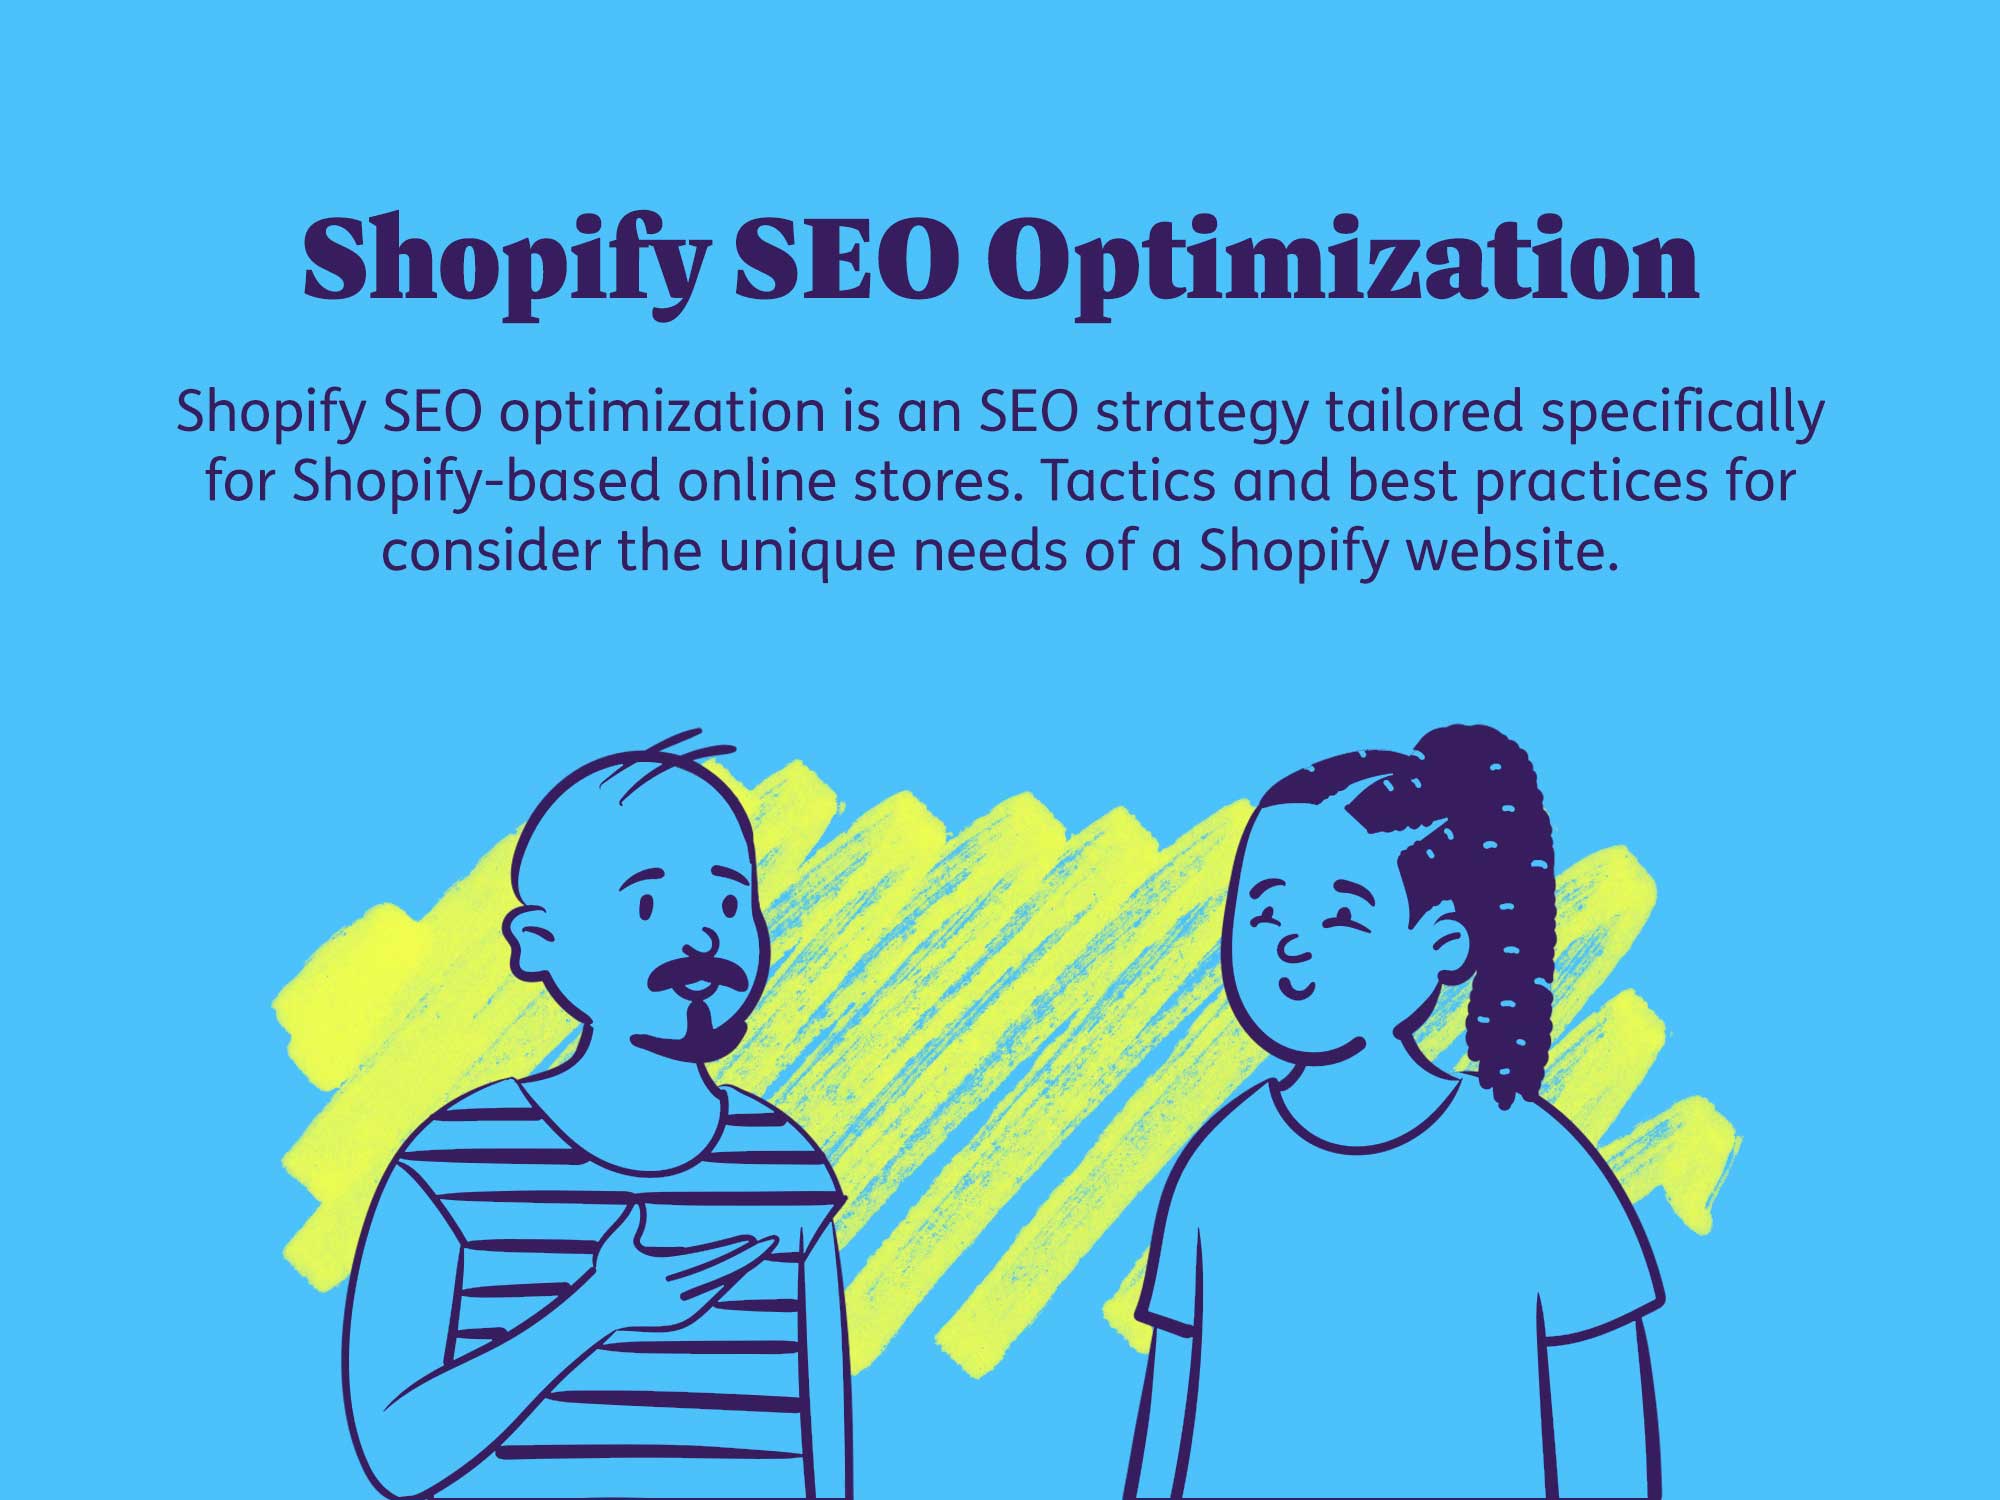 Shopify SEO optimization is an SEO strategy tailored specifically for Shopify-based online stores. Tactics and best practices for consider the unique needs of a Shopify website.